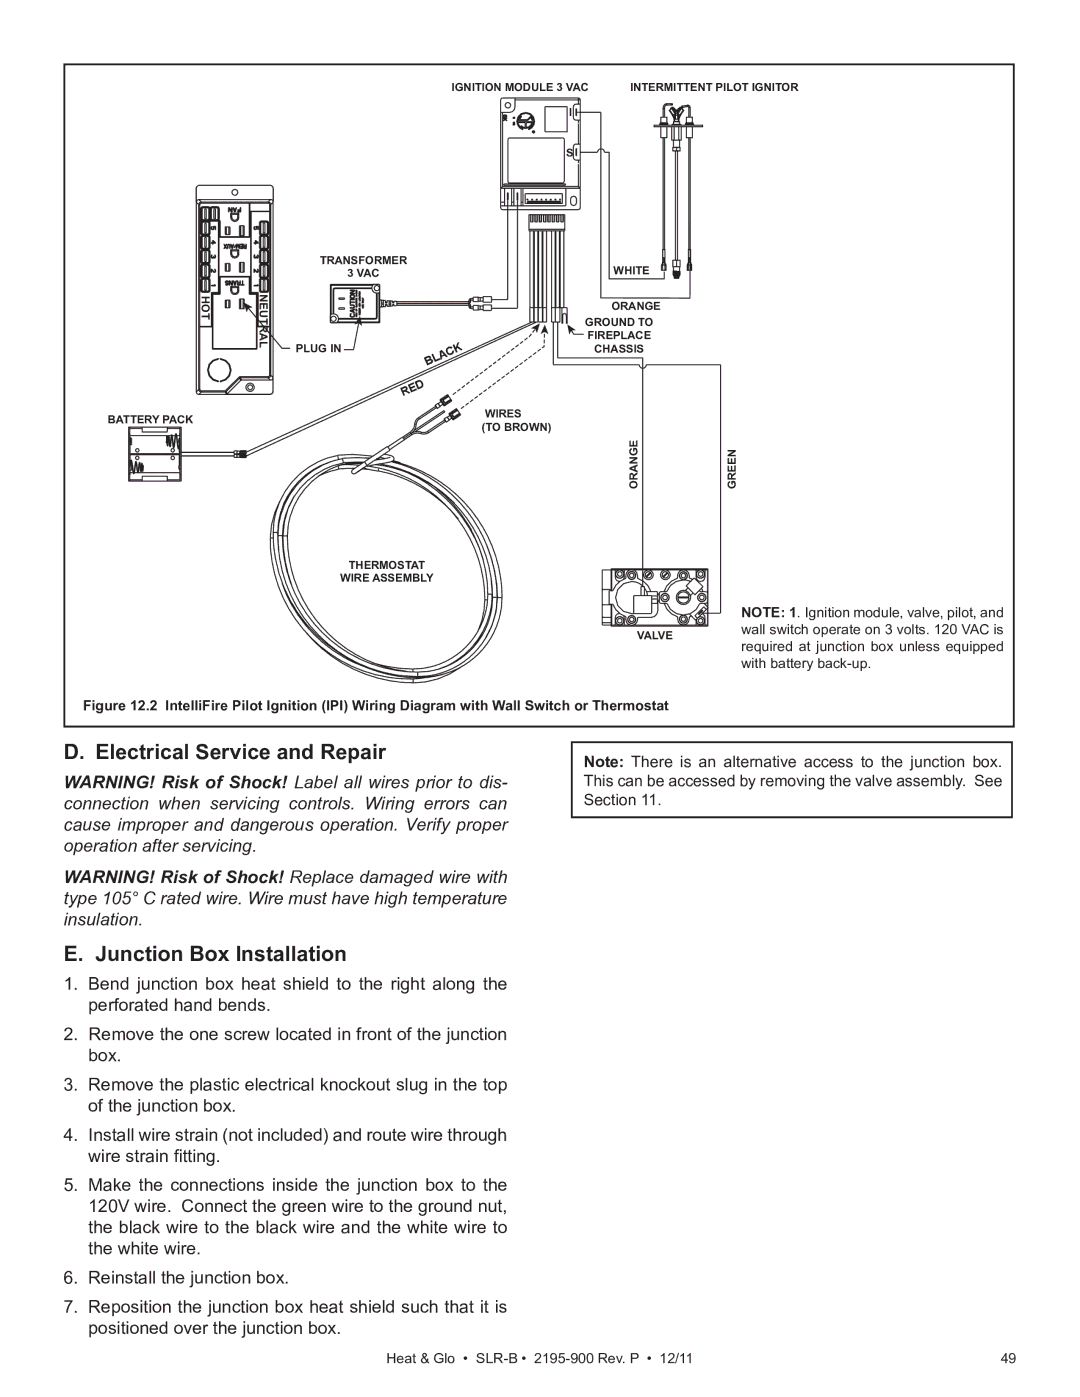 Heat & Glo LifeStyle SLR-B (COSMO) owner manual Electrical Service and Repair Junction Box Installation 